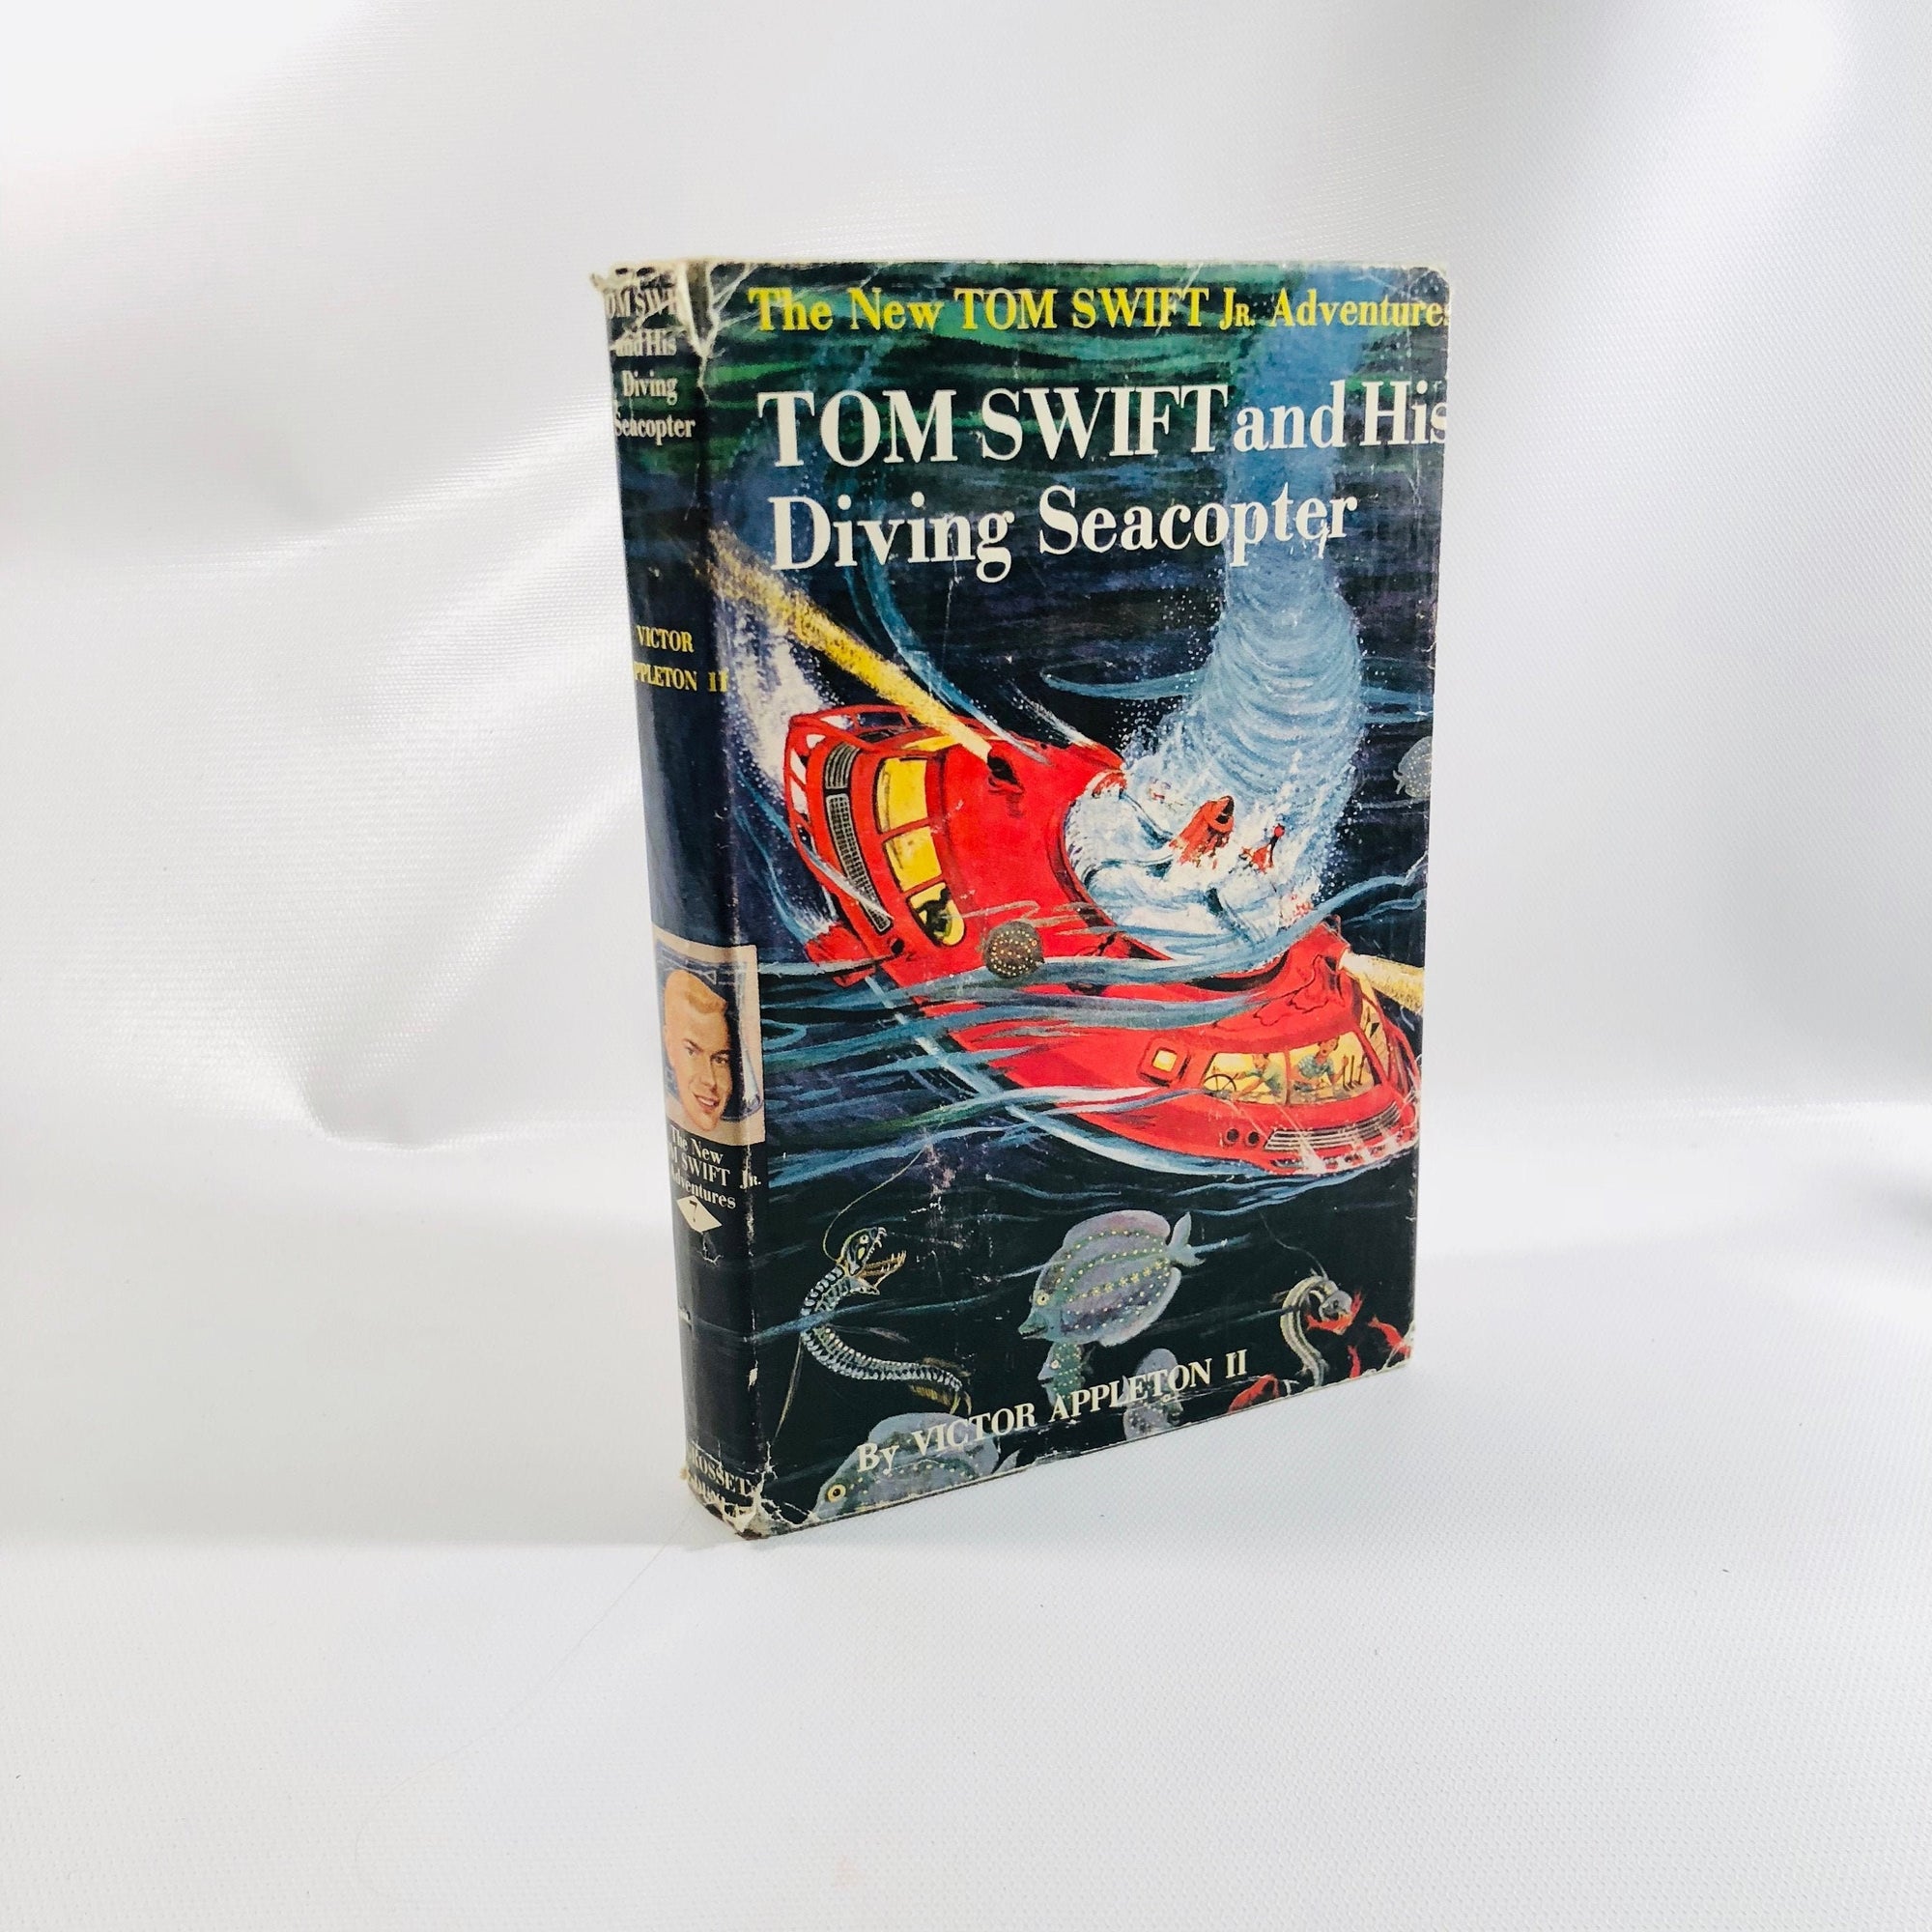 Tom Swift and his Diving Seacopter by Victor Appleton 1956 Book in the Series of the New Tom Swift Jr. Vintage BookVintage Book